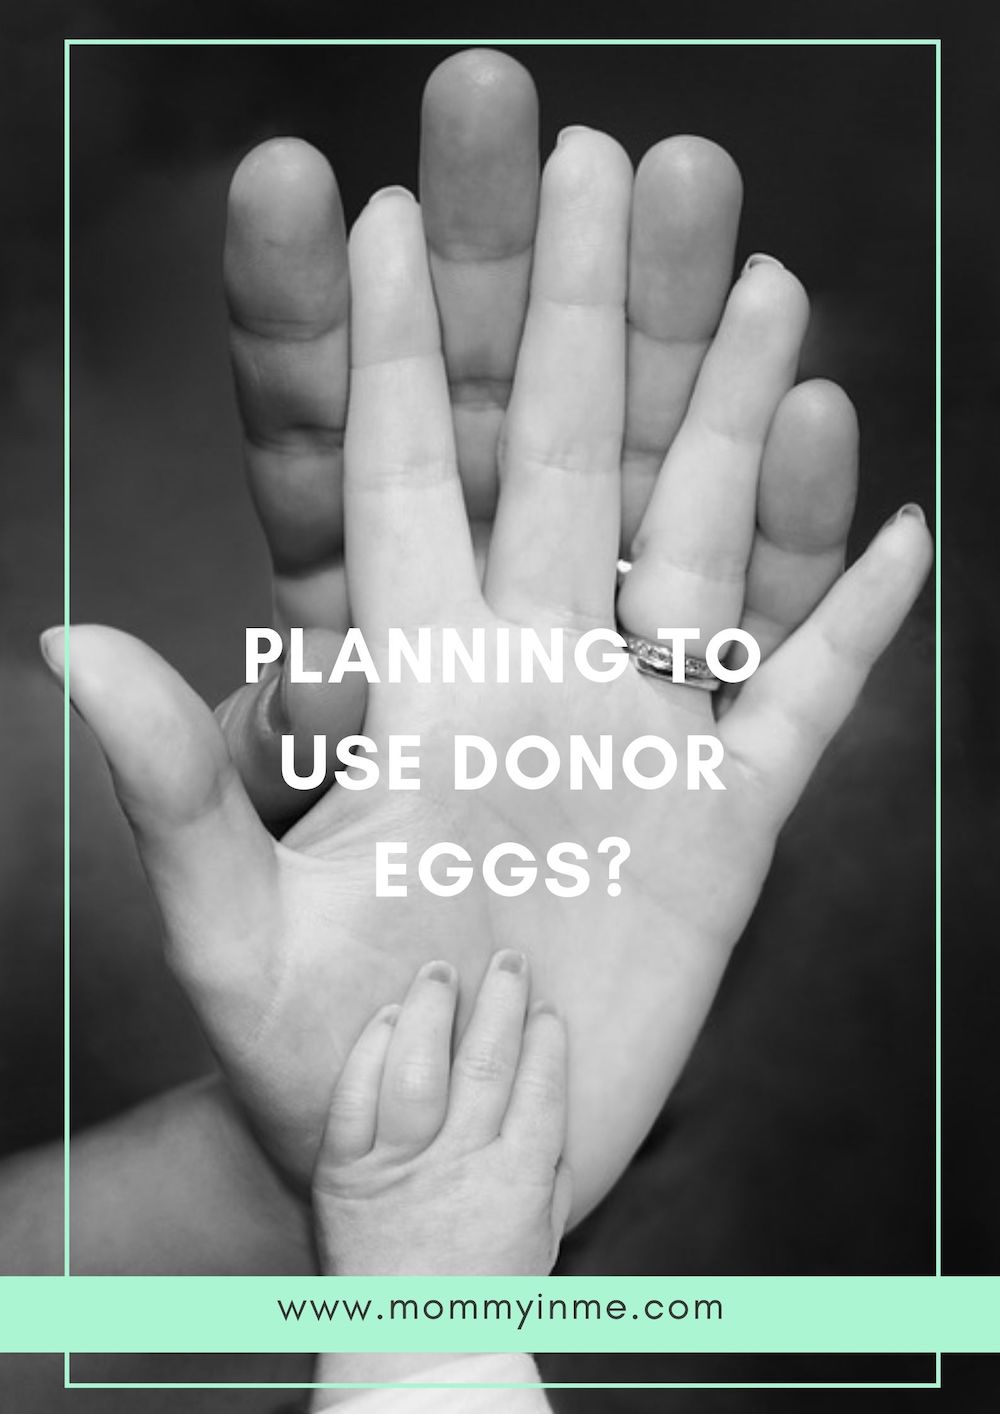 various fertility treatments like IUI, IVF and donor eggs still offer a light at the end of the tunnel. If using donor eggs is your next step, you’ll undoubtedly have many questions, including how to choose your ‘perfect’ match from an egg bank’s ethnically diverse choice of egg donors. Read to get answers to your questions #infertility #IVF #IUI #fertility #treatments #donoregg #egg #sperm 